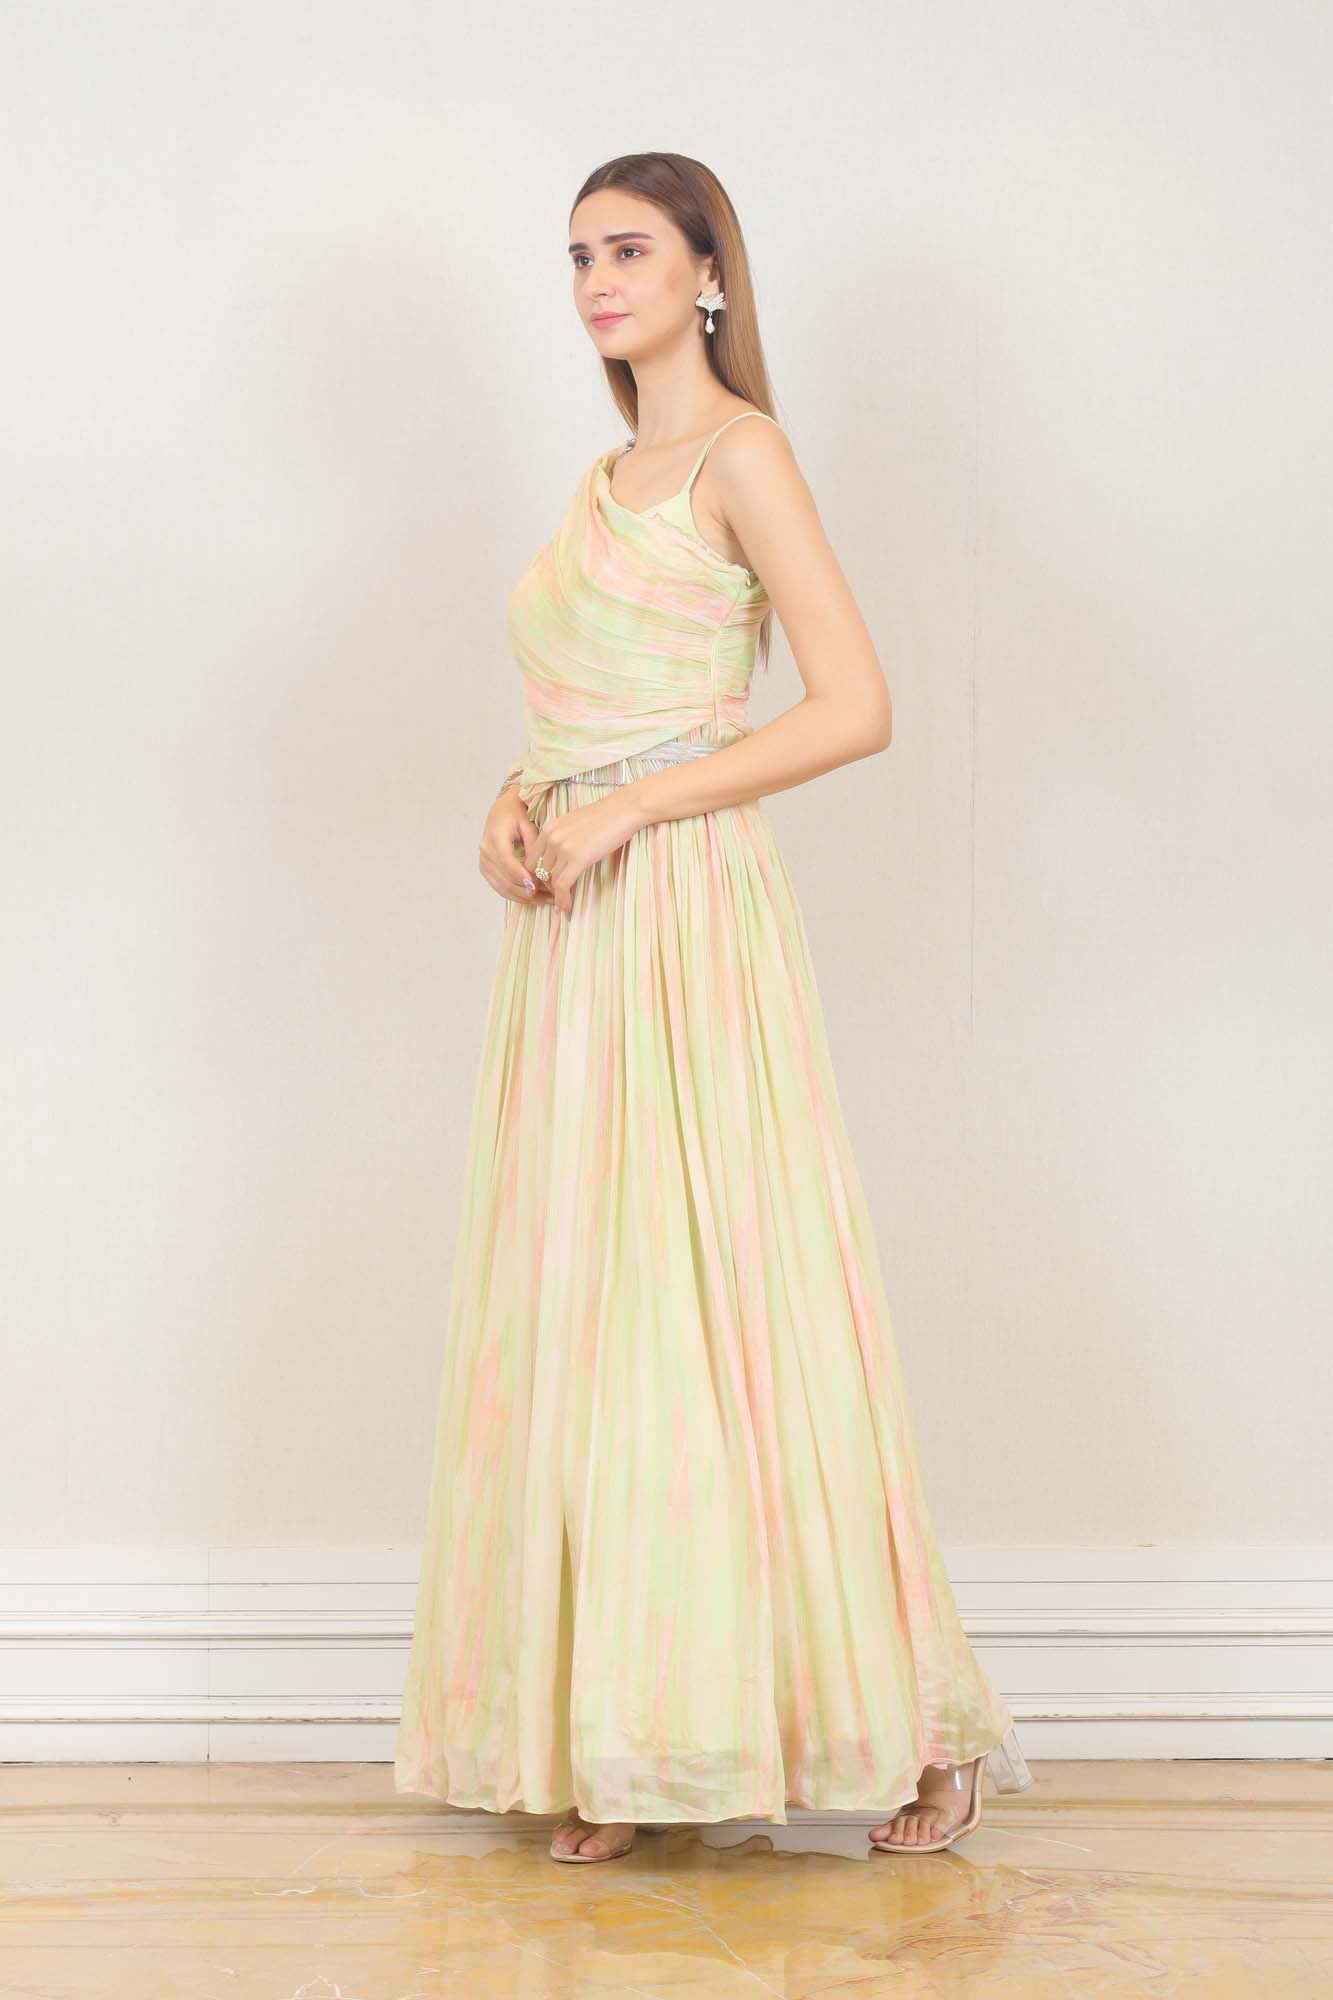 Light Green Color Satin Fabric Gown With Resham Work